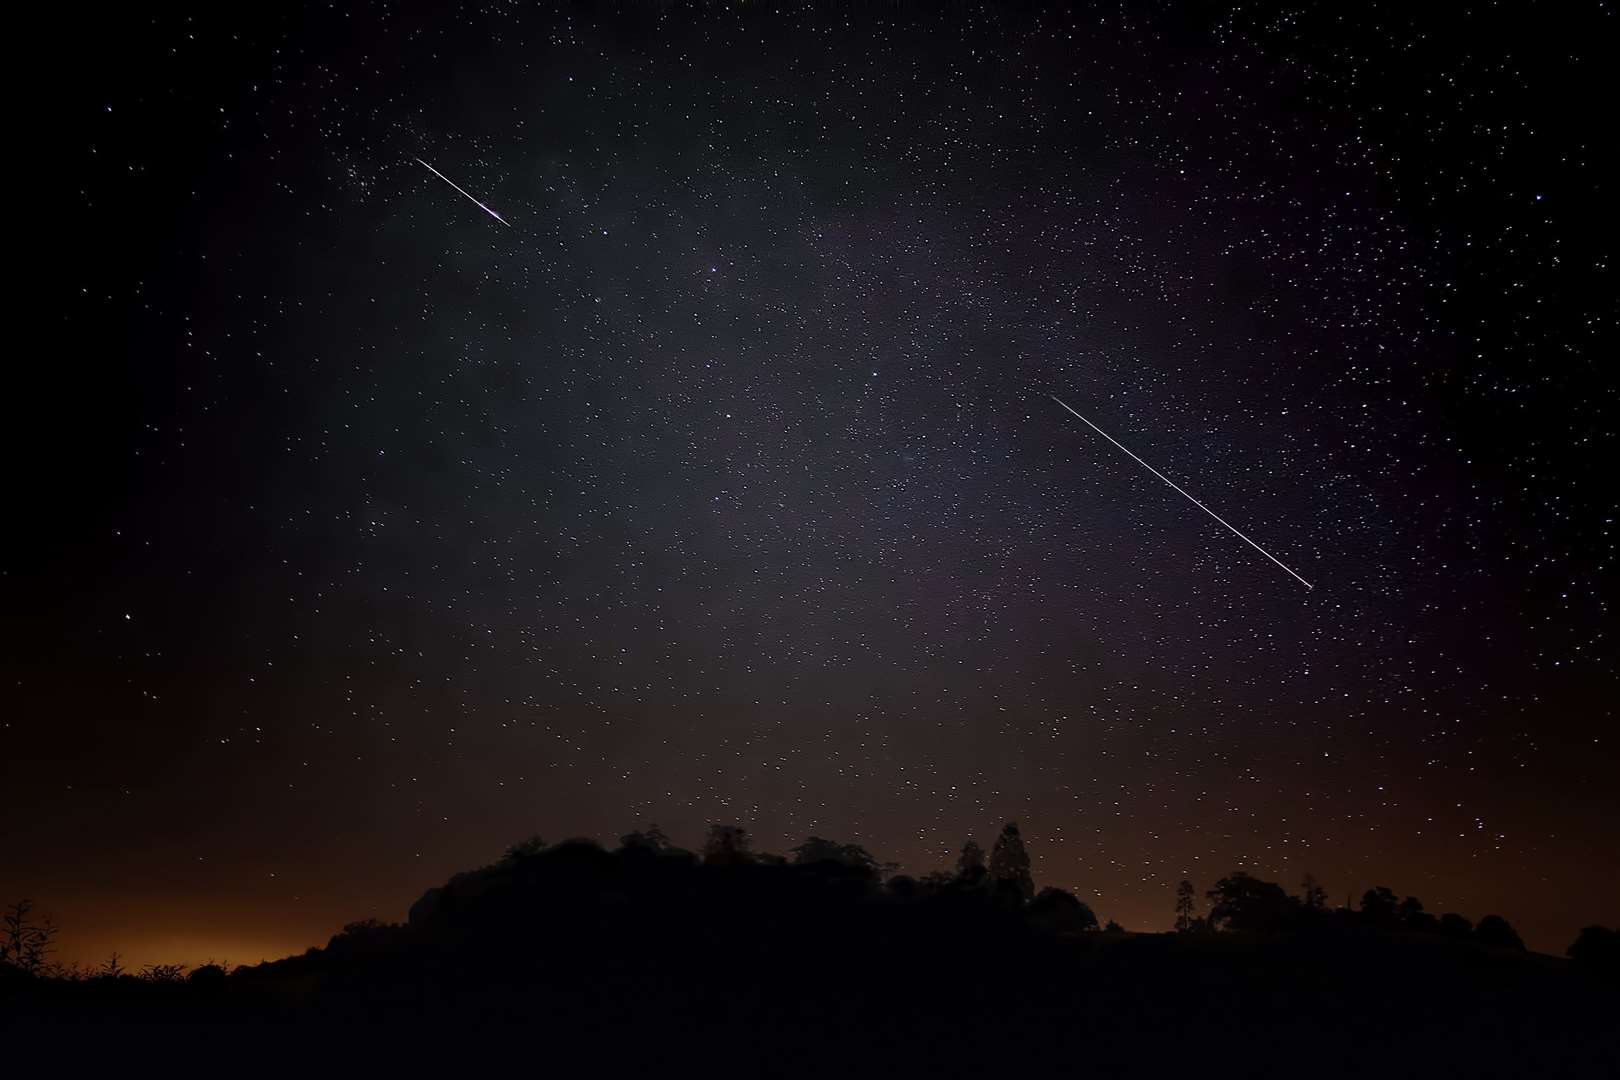 Up to 15 shooting stars can be visible every hour during a Leonids shower